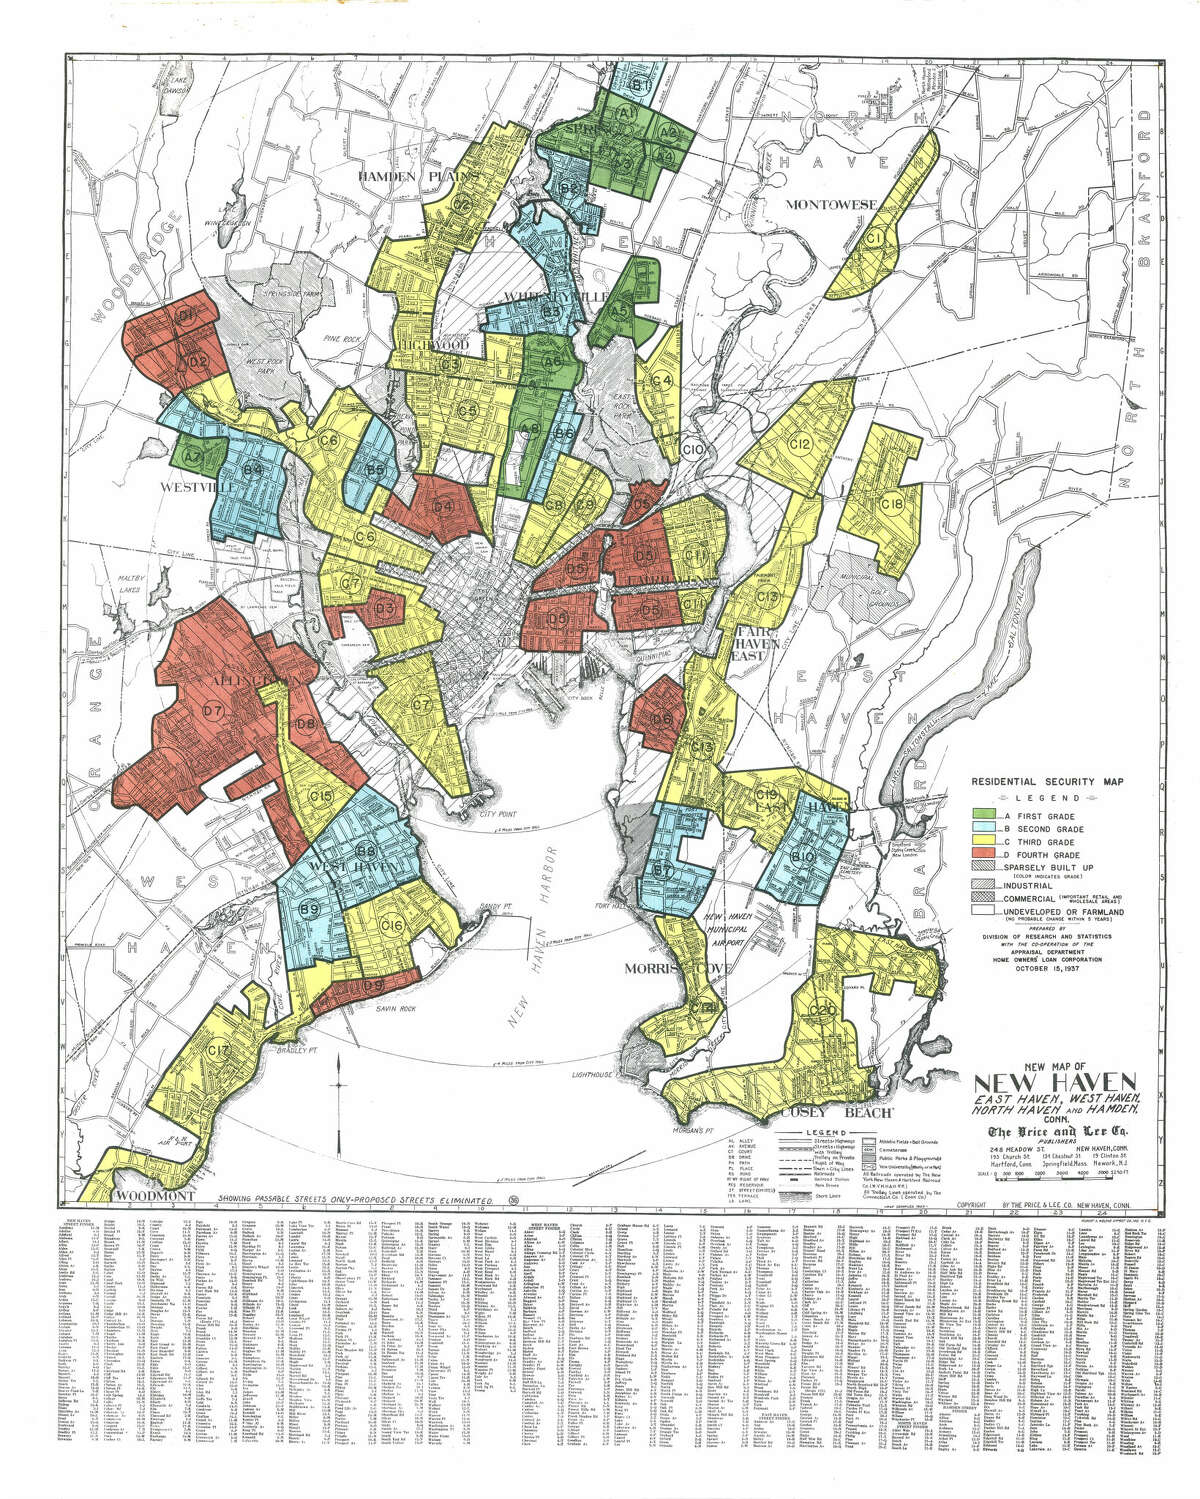 A 1937 map of New Haven divides the cities into areas deemed by experts to be risky for investment. Areas in red have been "redlined" and were cut off in many cases from loans and other financing. A recent study shows that the impact of these redlining decisions can be seen today in the density of bird sightings in each neighborhood nationwide. New Haven has the highest disparity. Scan provided by Mapping Inequality.  